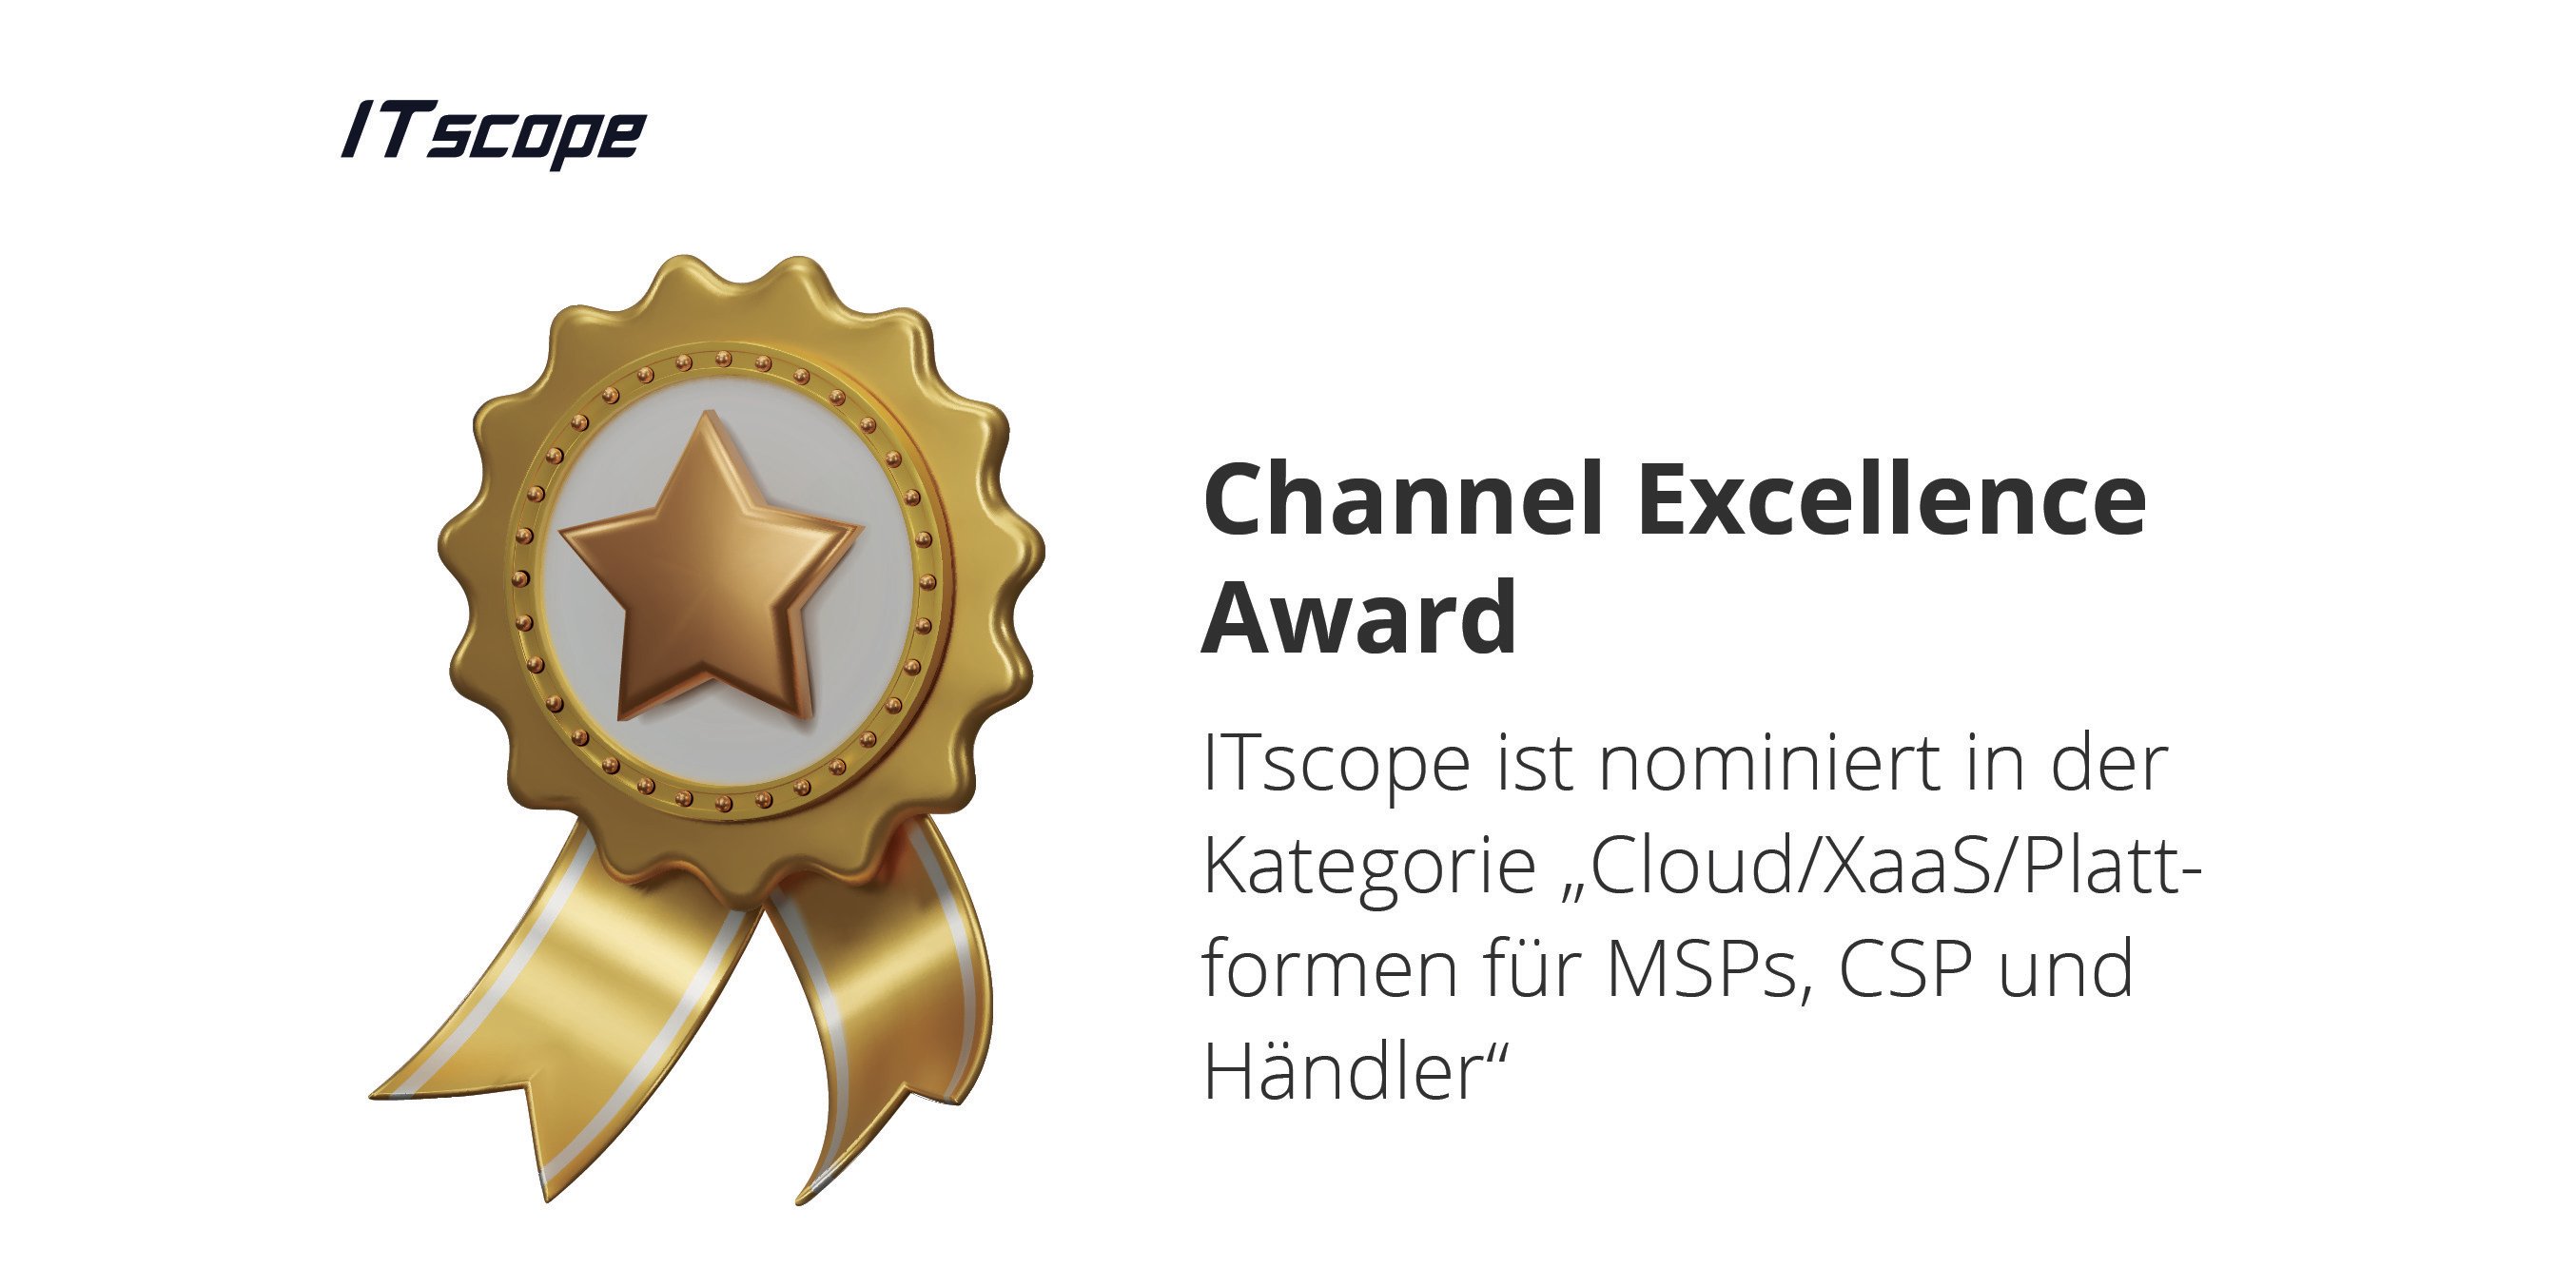 Channel Excellence Awards 2025: ITscope ist nominiert